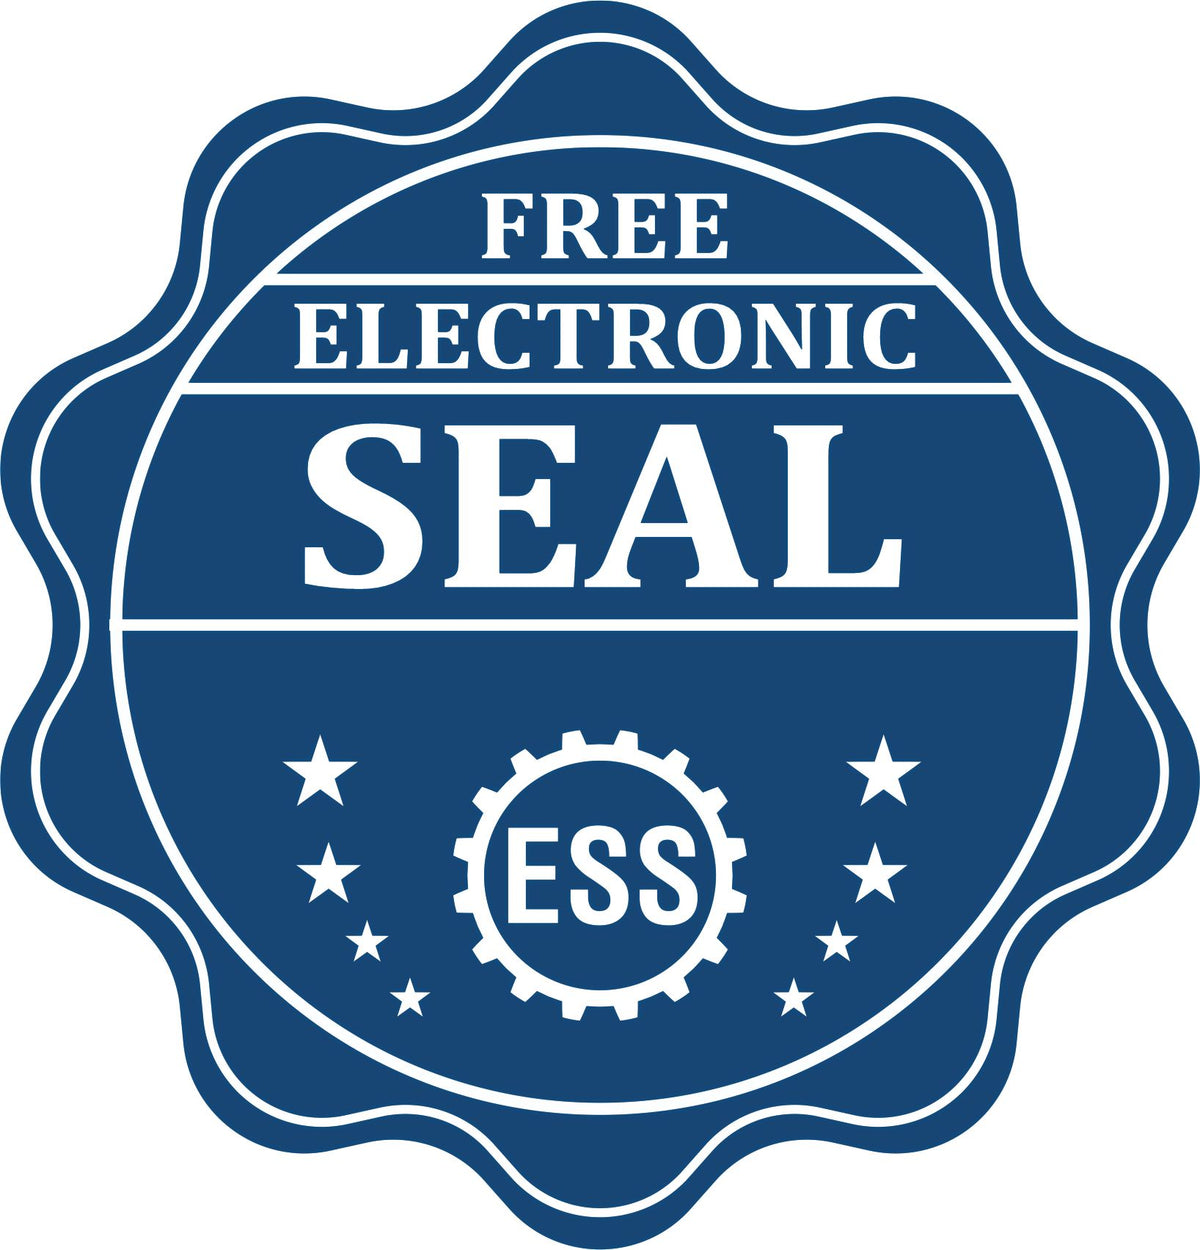 A badge showing a free electronic seal for the State of Iowa Extended Long Reach Engineer Seal with stars and the ESS gear on the emblem.